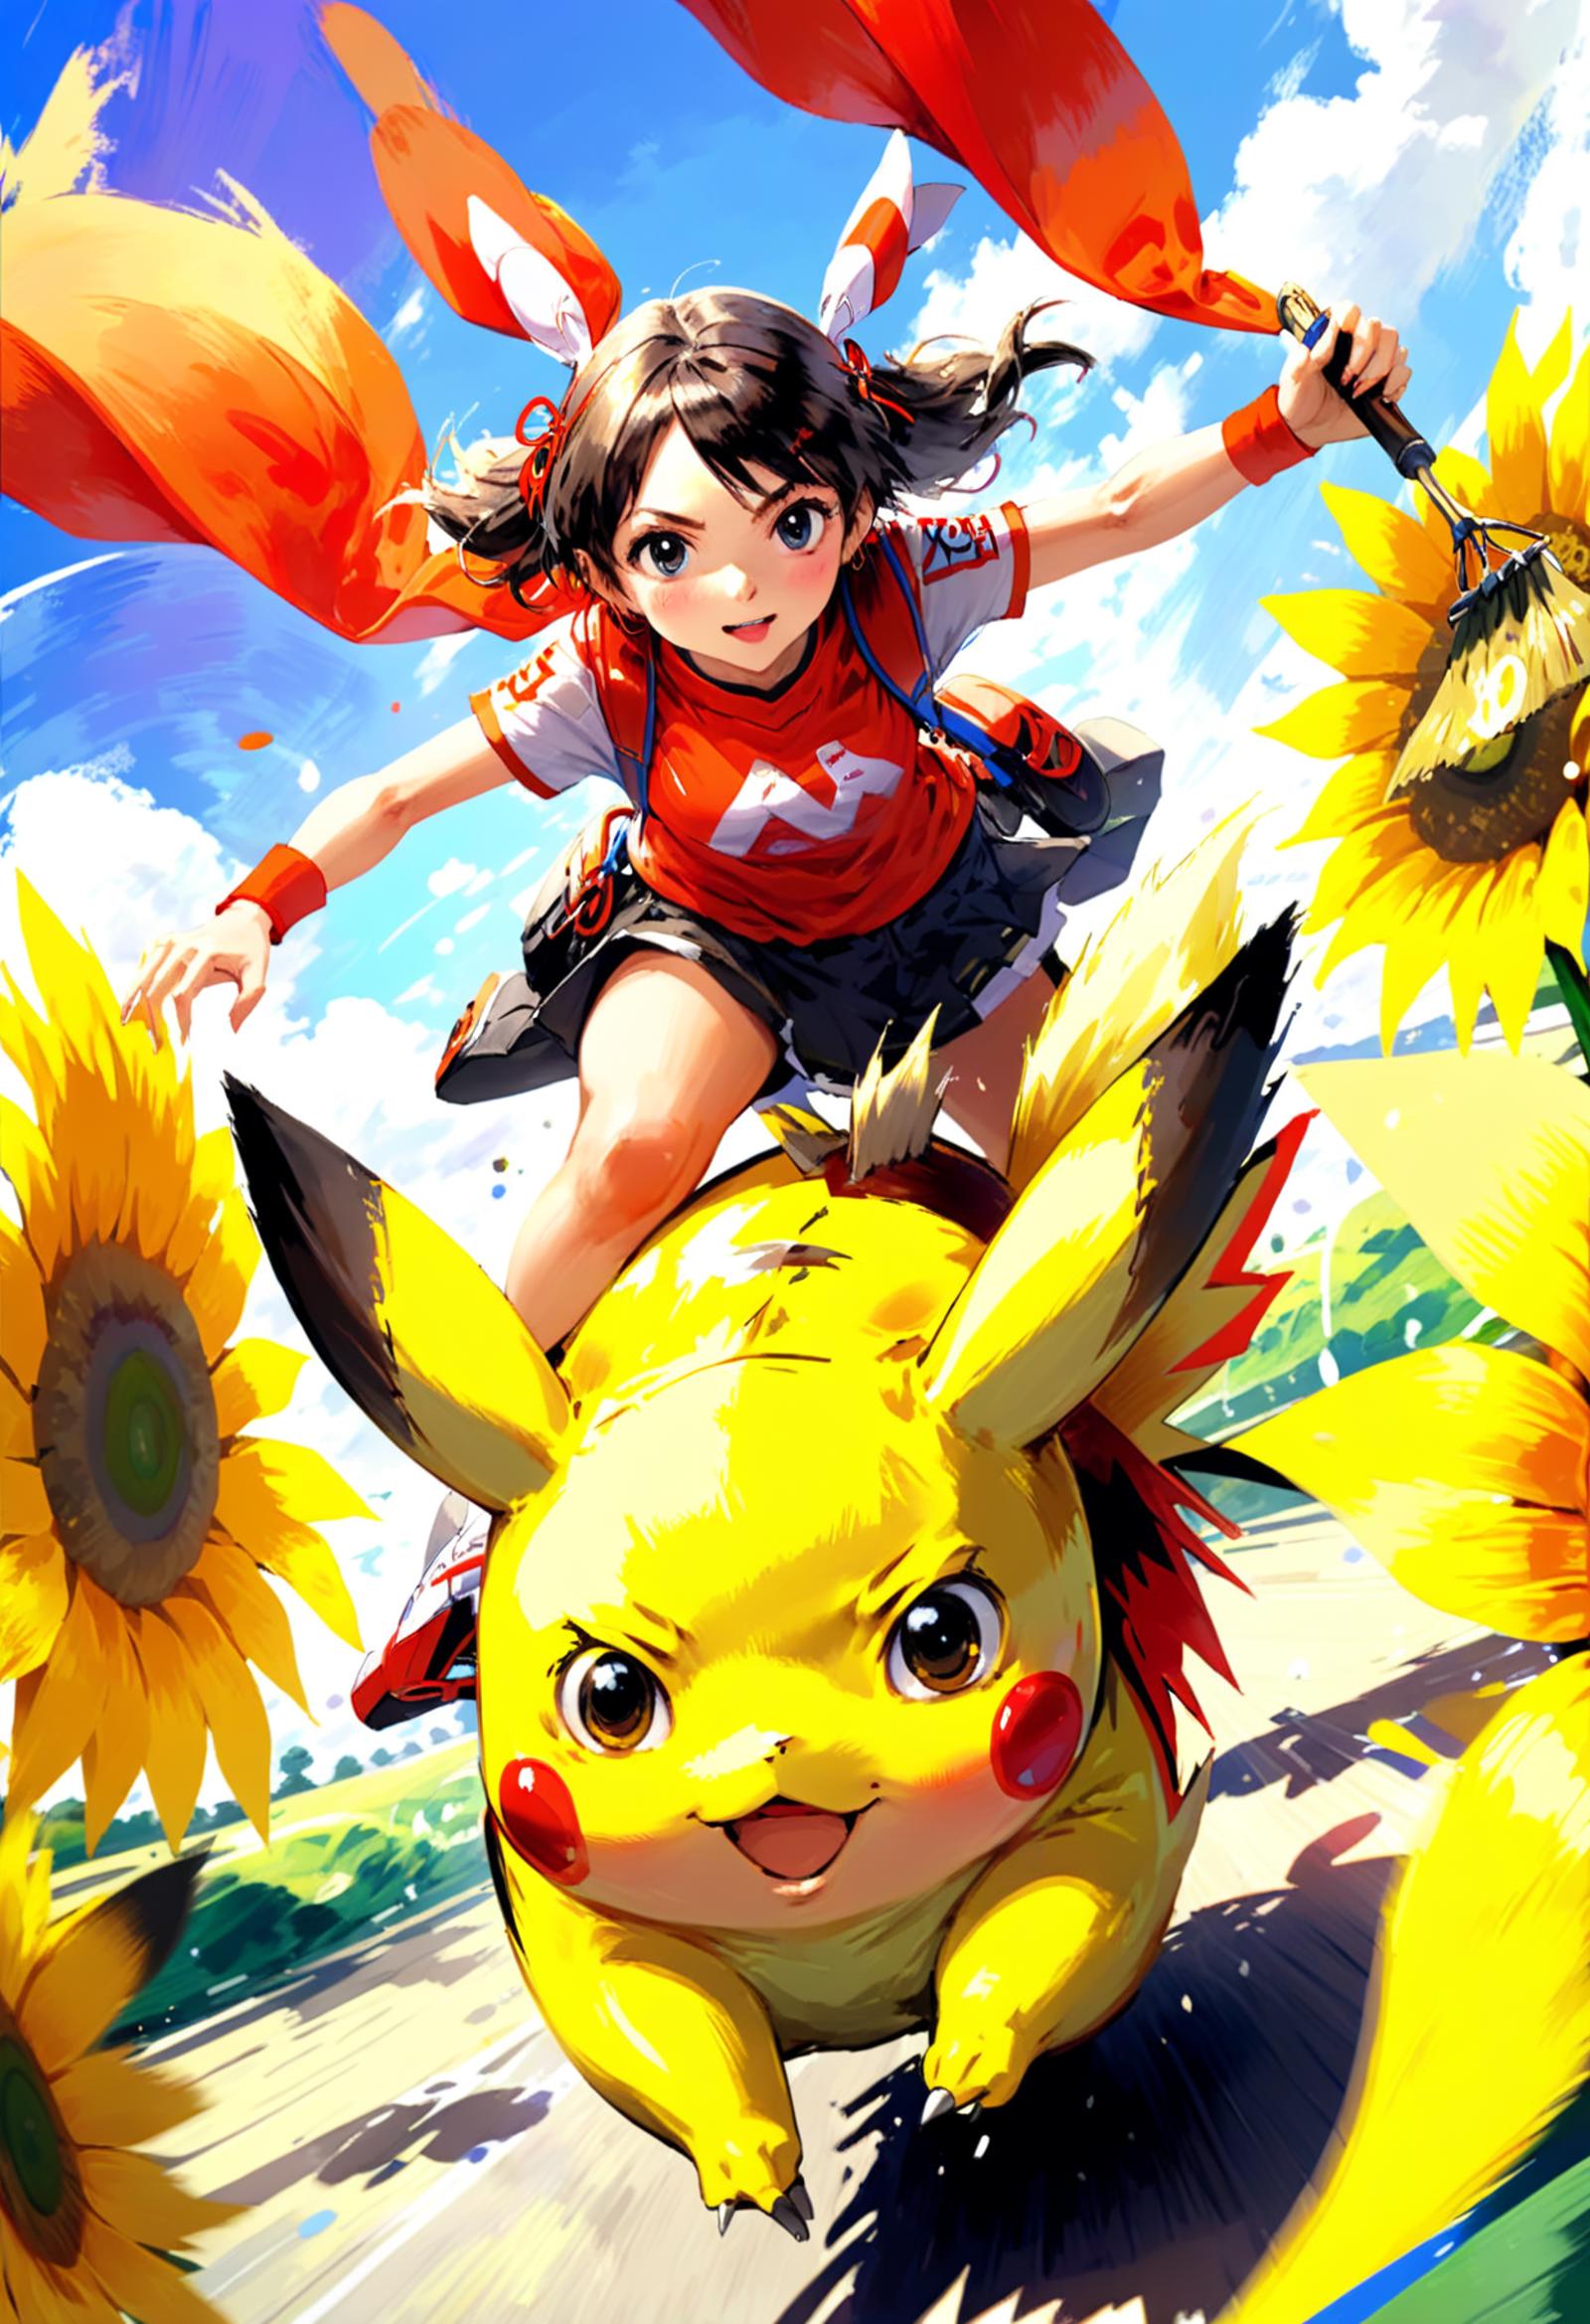 A young girl riding a yellow and black Pokemon character